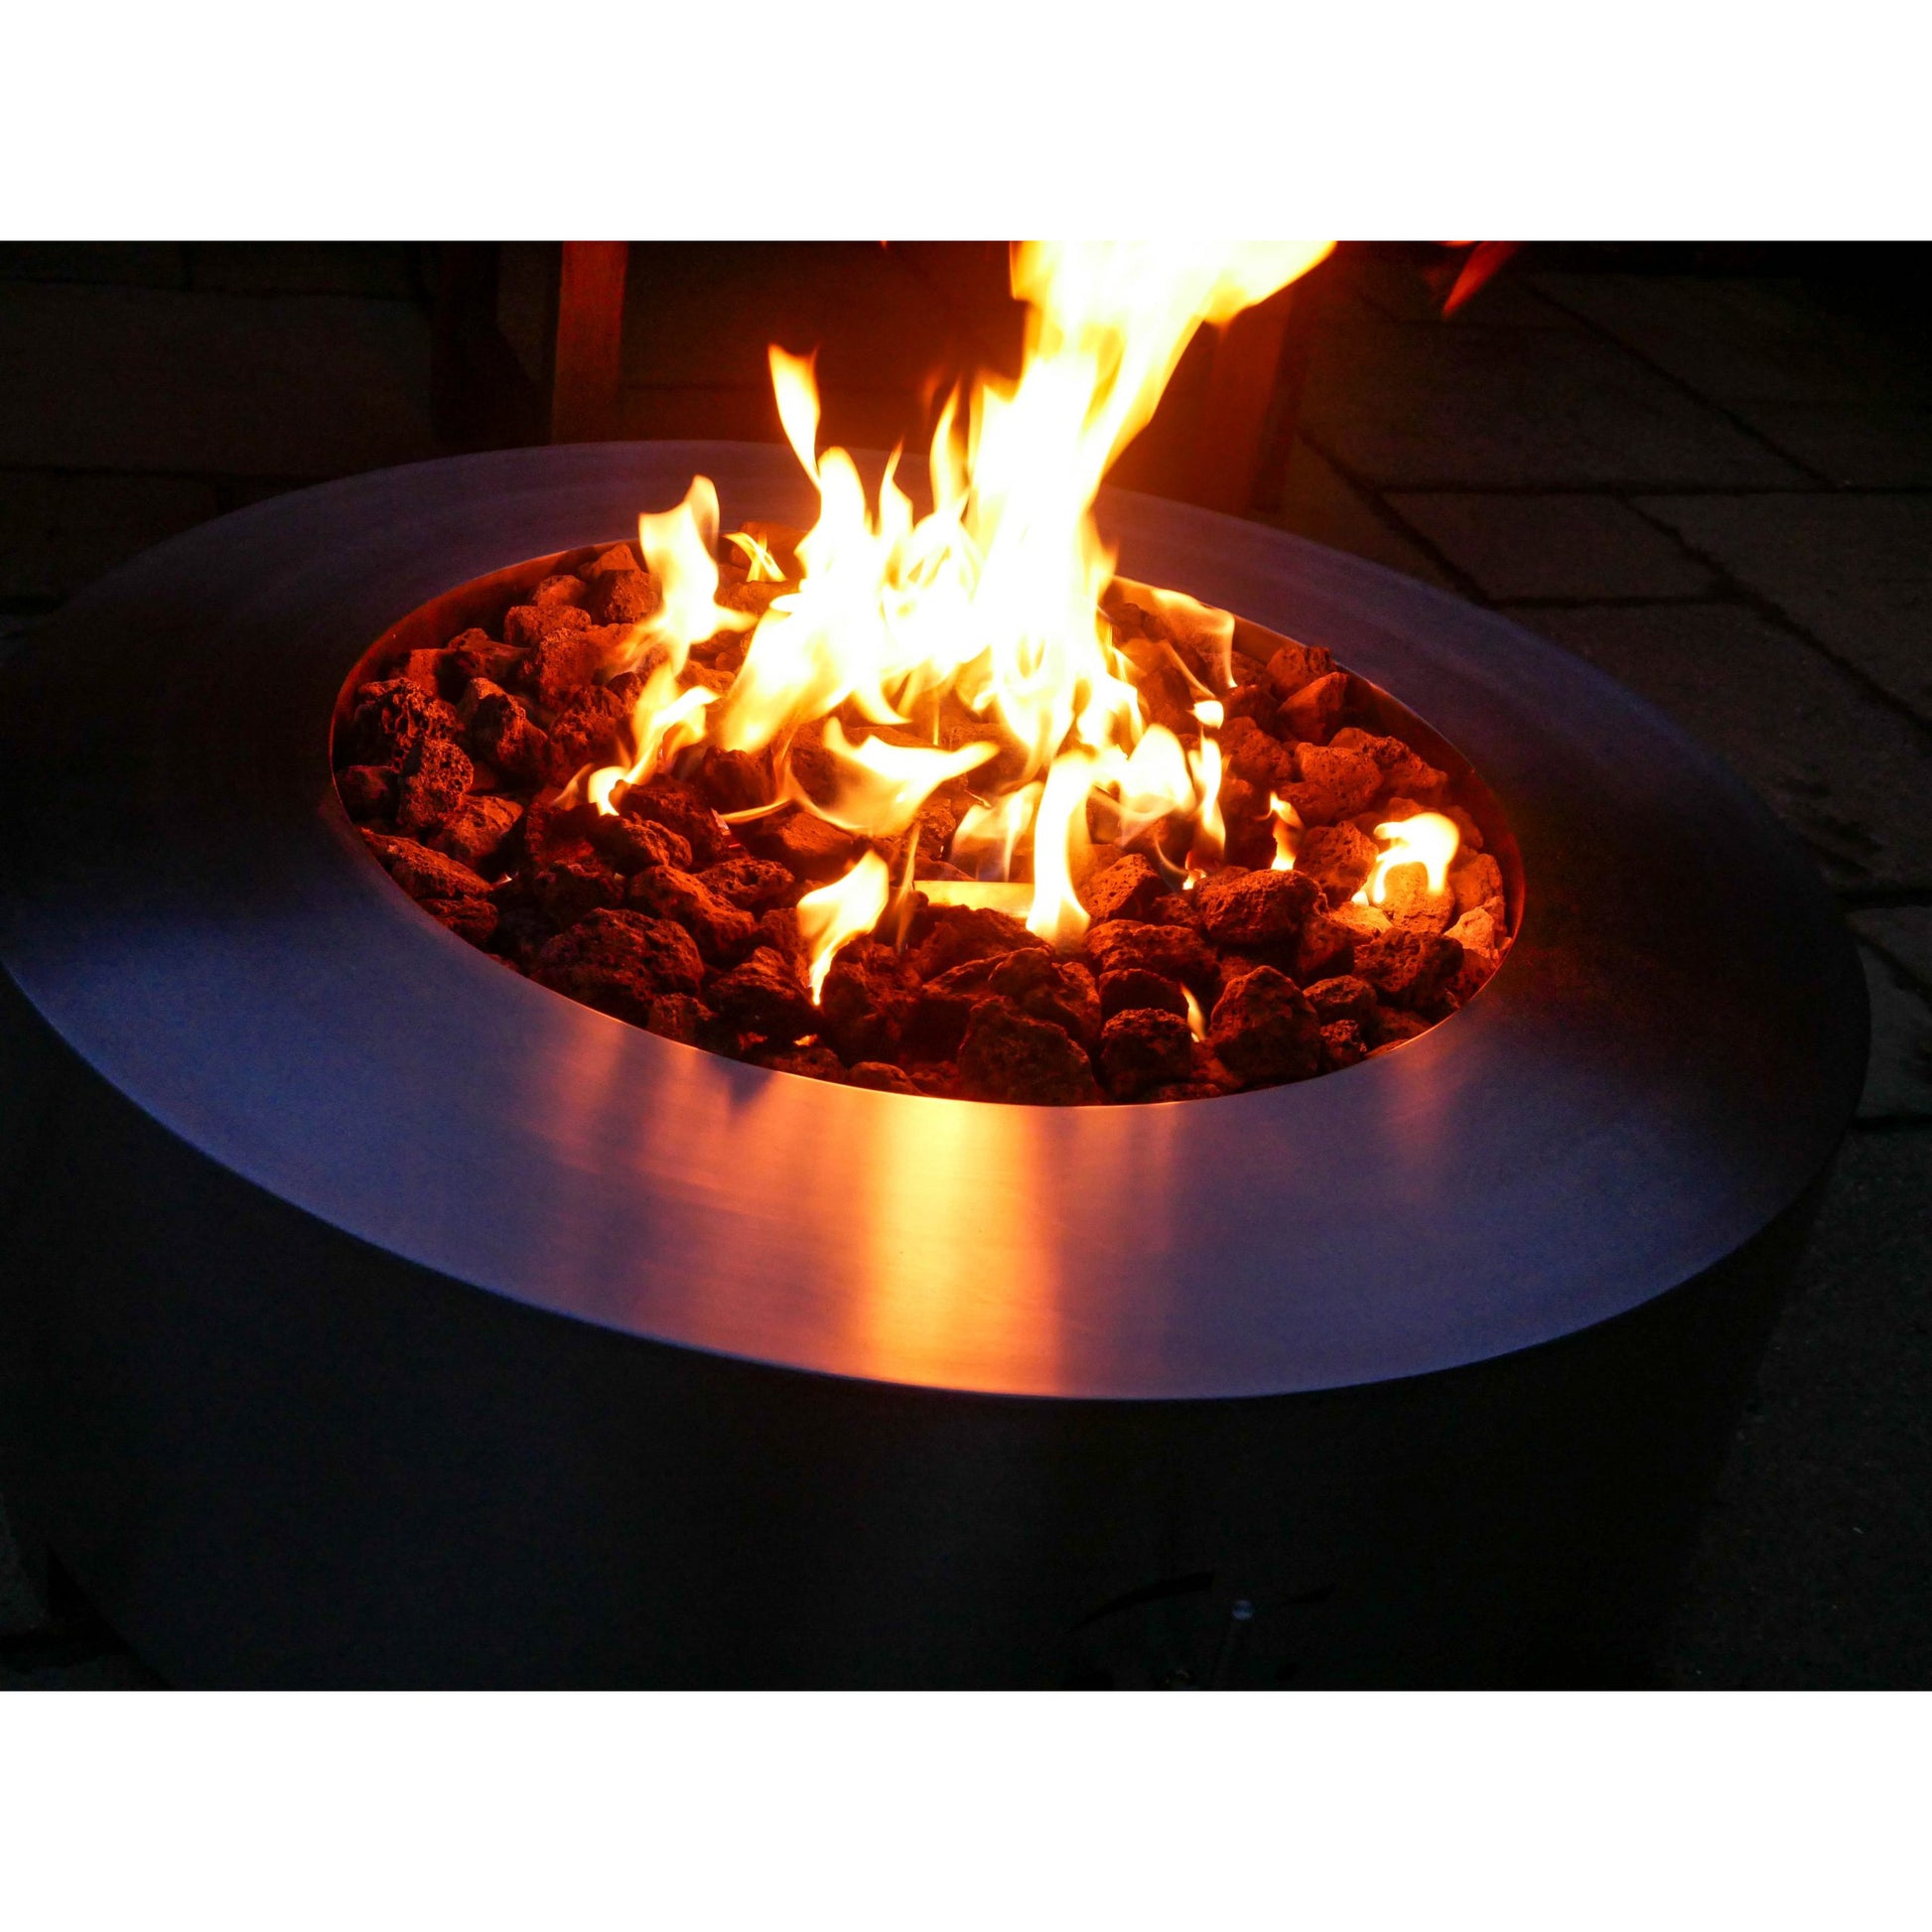 Brightstar Fires - Saturn Gas Fire Pit Table - Round - Luxury Fire Pits - PadioLiving - Brightstar Fires - Saturn Gas Fire Pit Table - Round - Luxury Fire Pits - Fire Pit Table - PadioLiving